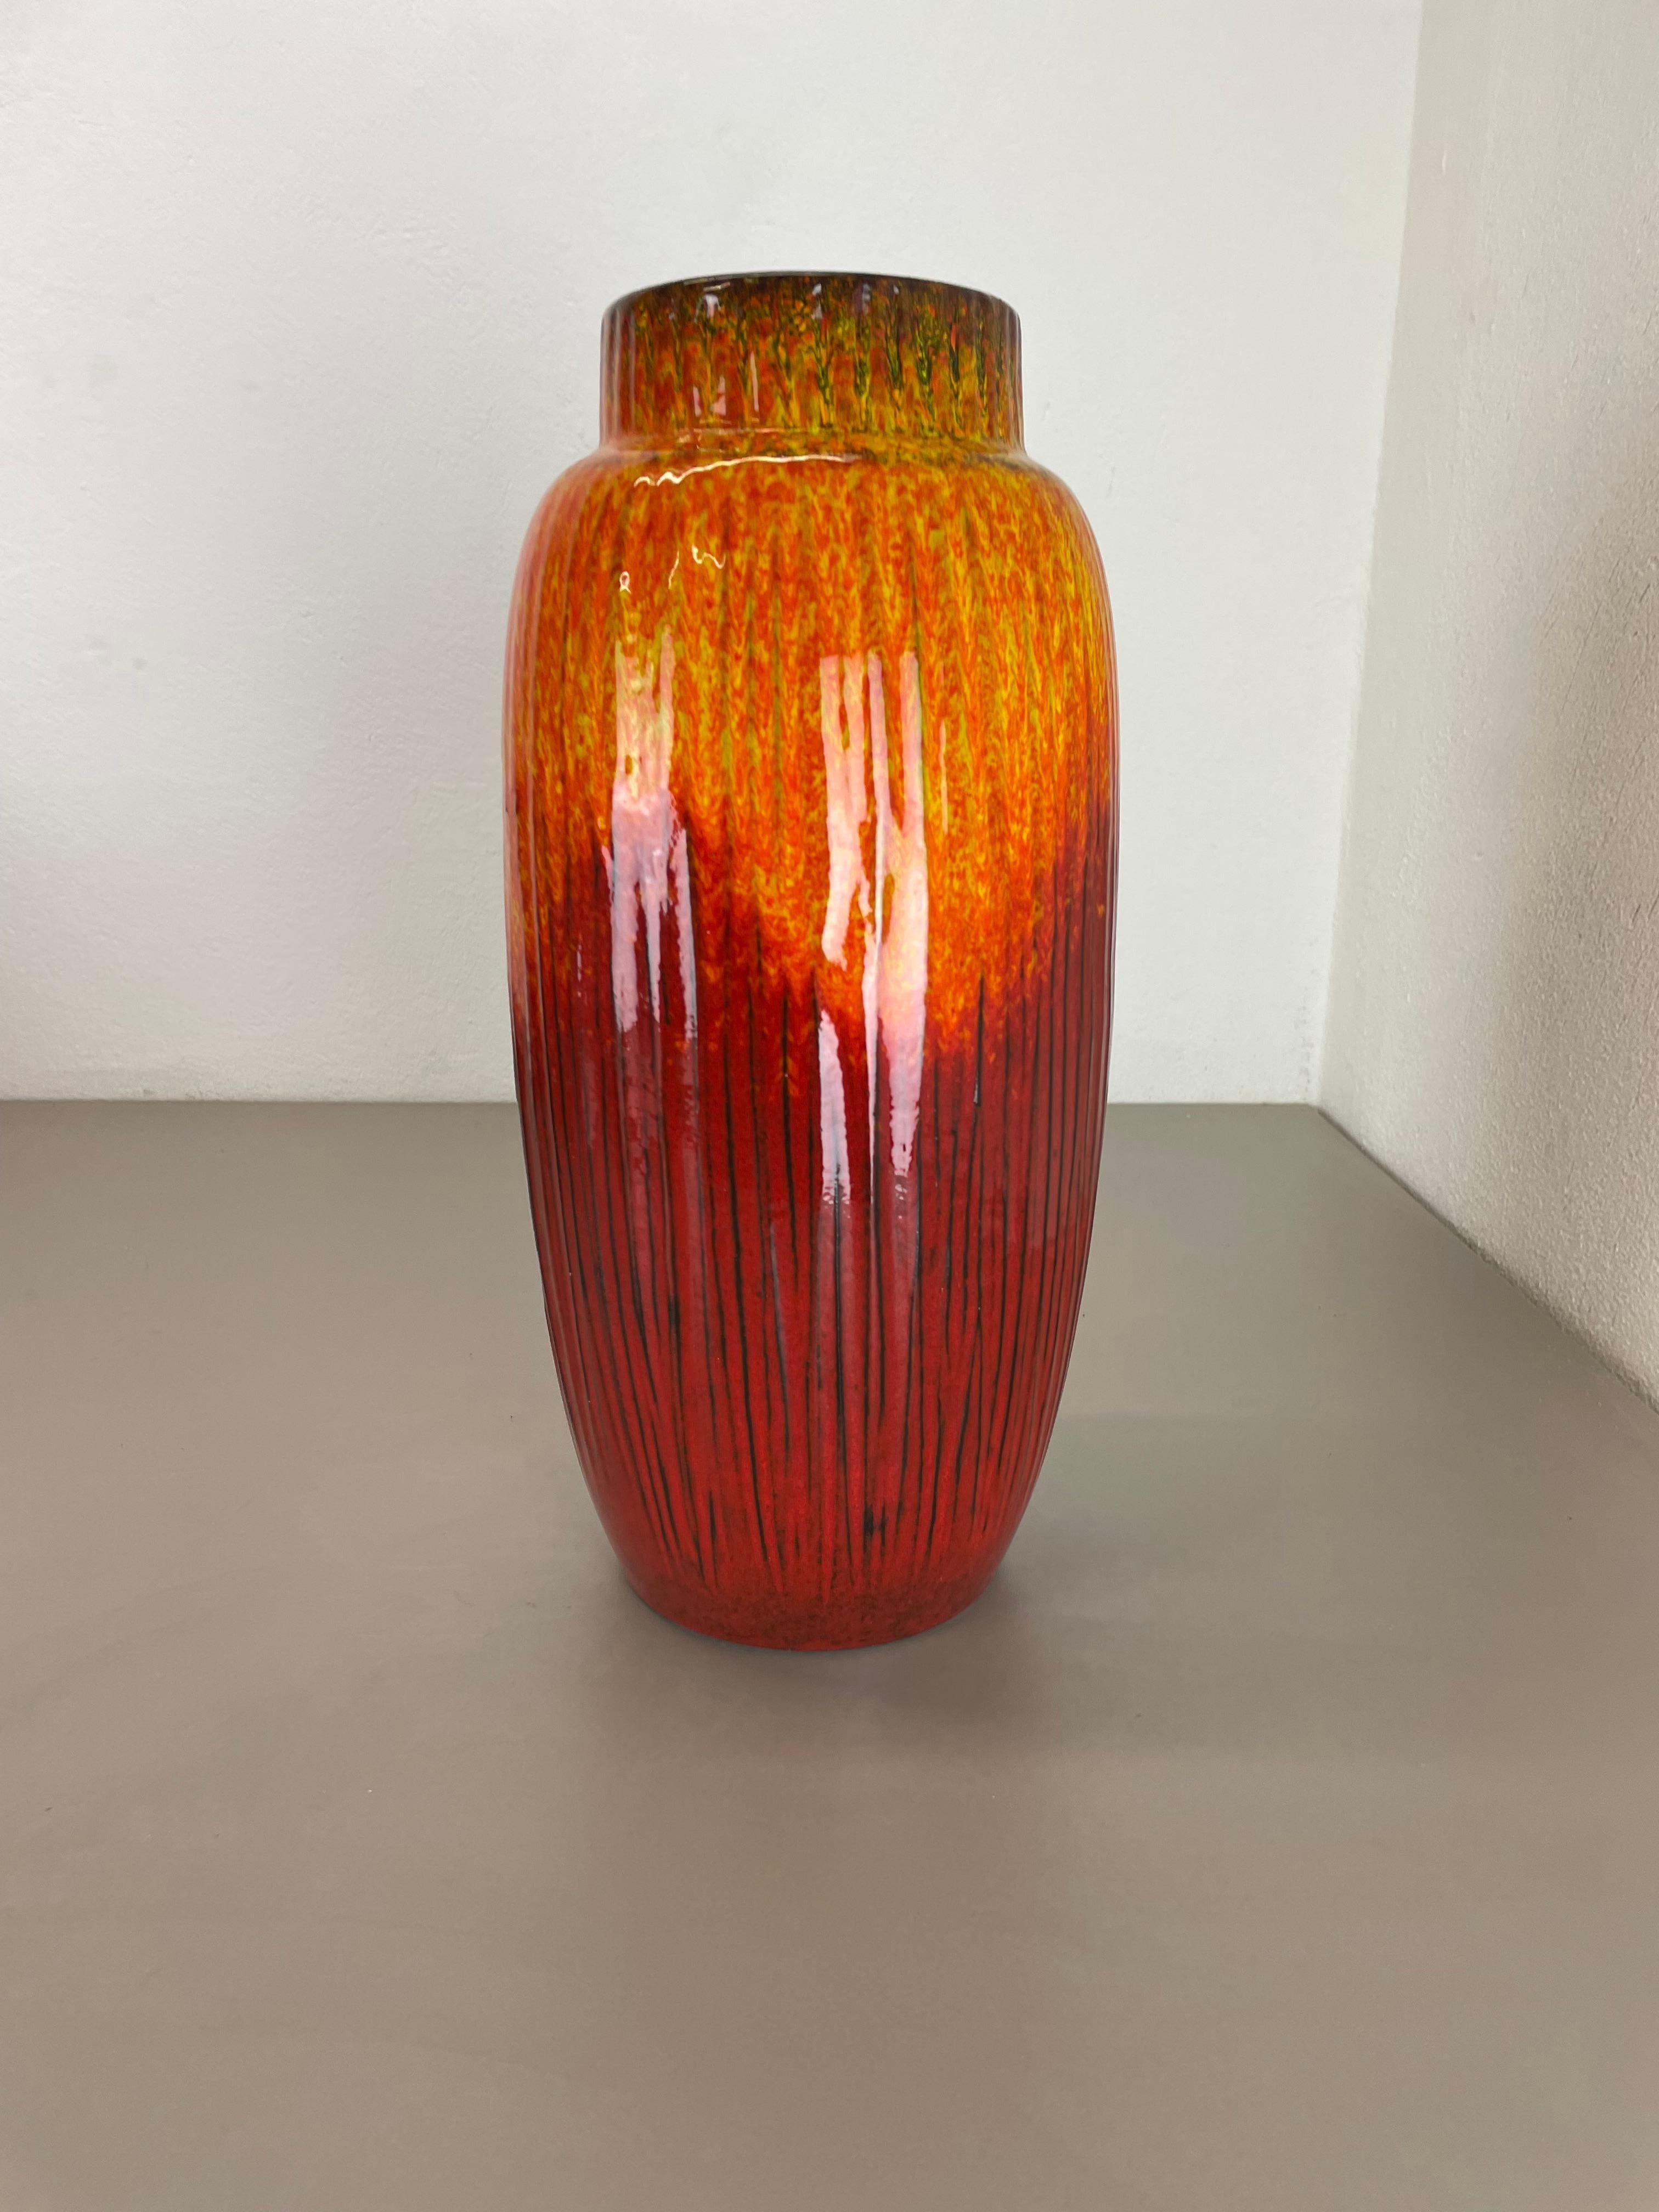 Article:

Fat lava art vase extra large version


Model: 553-38


Producer:

Scheurich, Germany



Decade:

1970s


Description:

This original vintage vase was produced in the 1970s in Germany. It is made of ceramic pottery in fat lava optic with